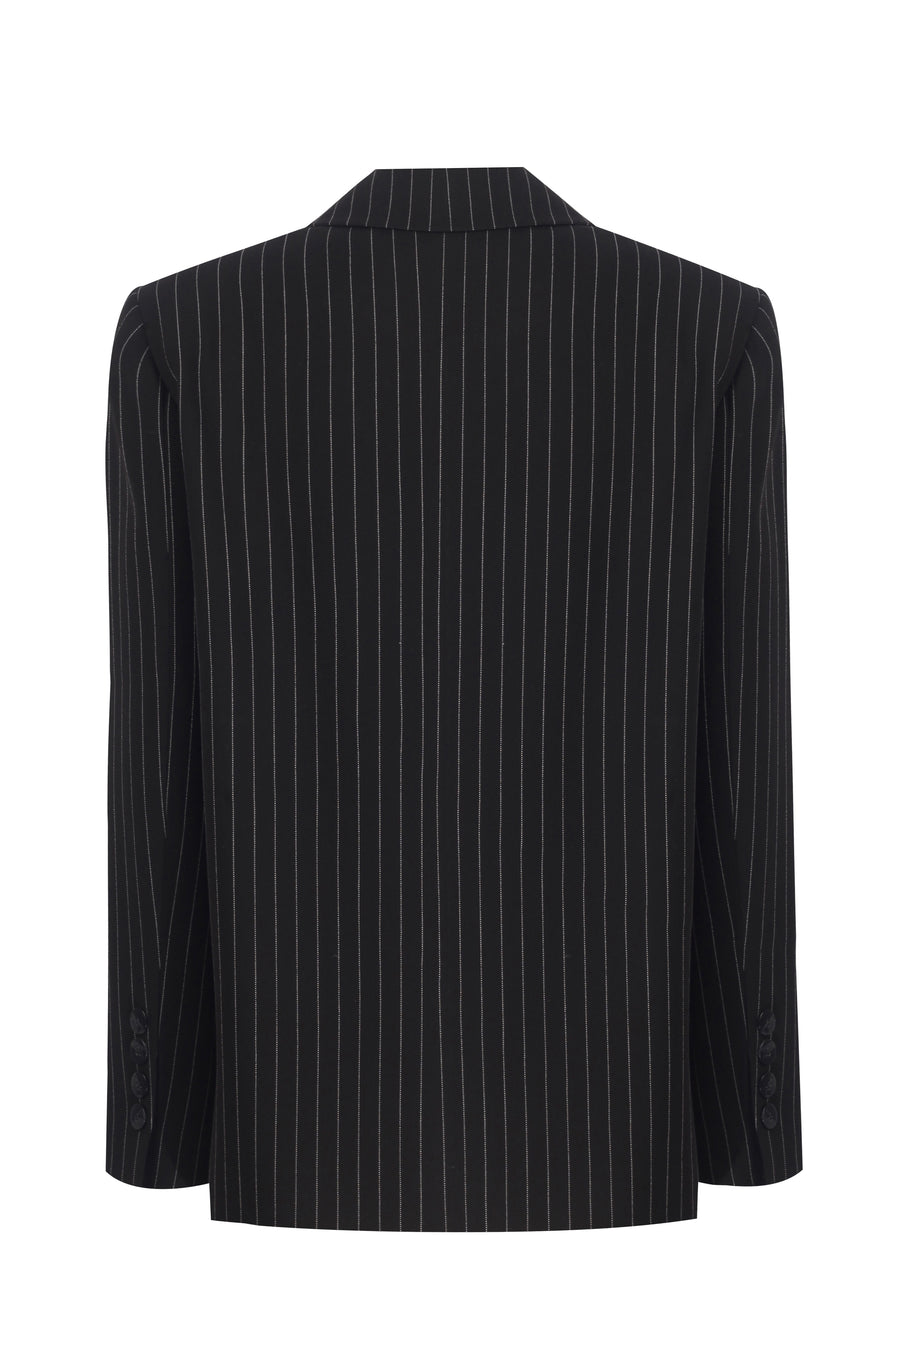 The Feya Striped Suit